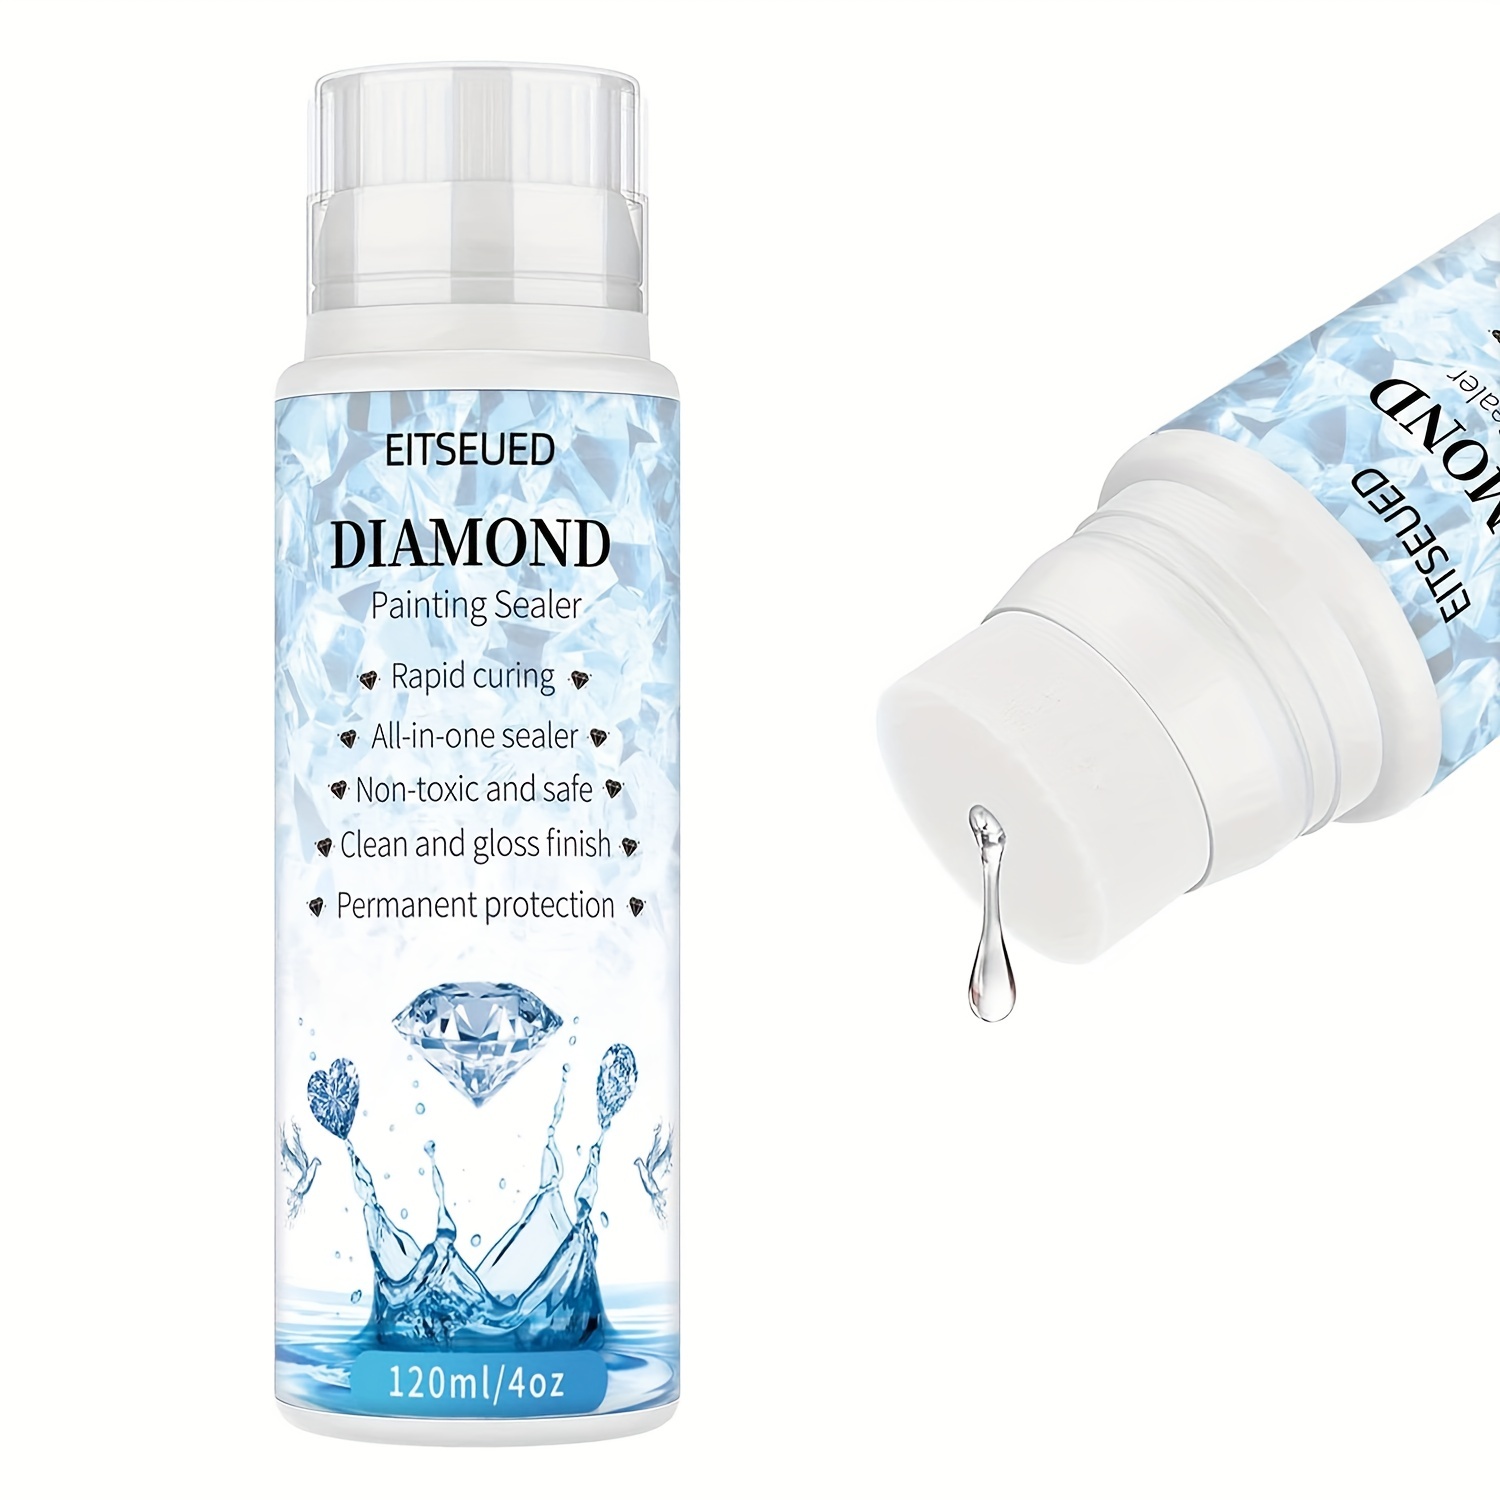 Diamond Painting Sealer, 5D Diamond Painting Glue with Sponge Head  Permanent Hold Shine Effect Sealer for Diamond Painting Puzzle Glue DIY (4  OZ/120ML), 1PC in 2023